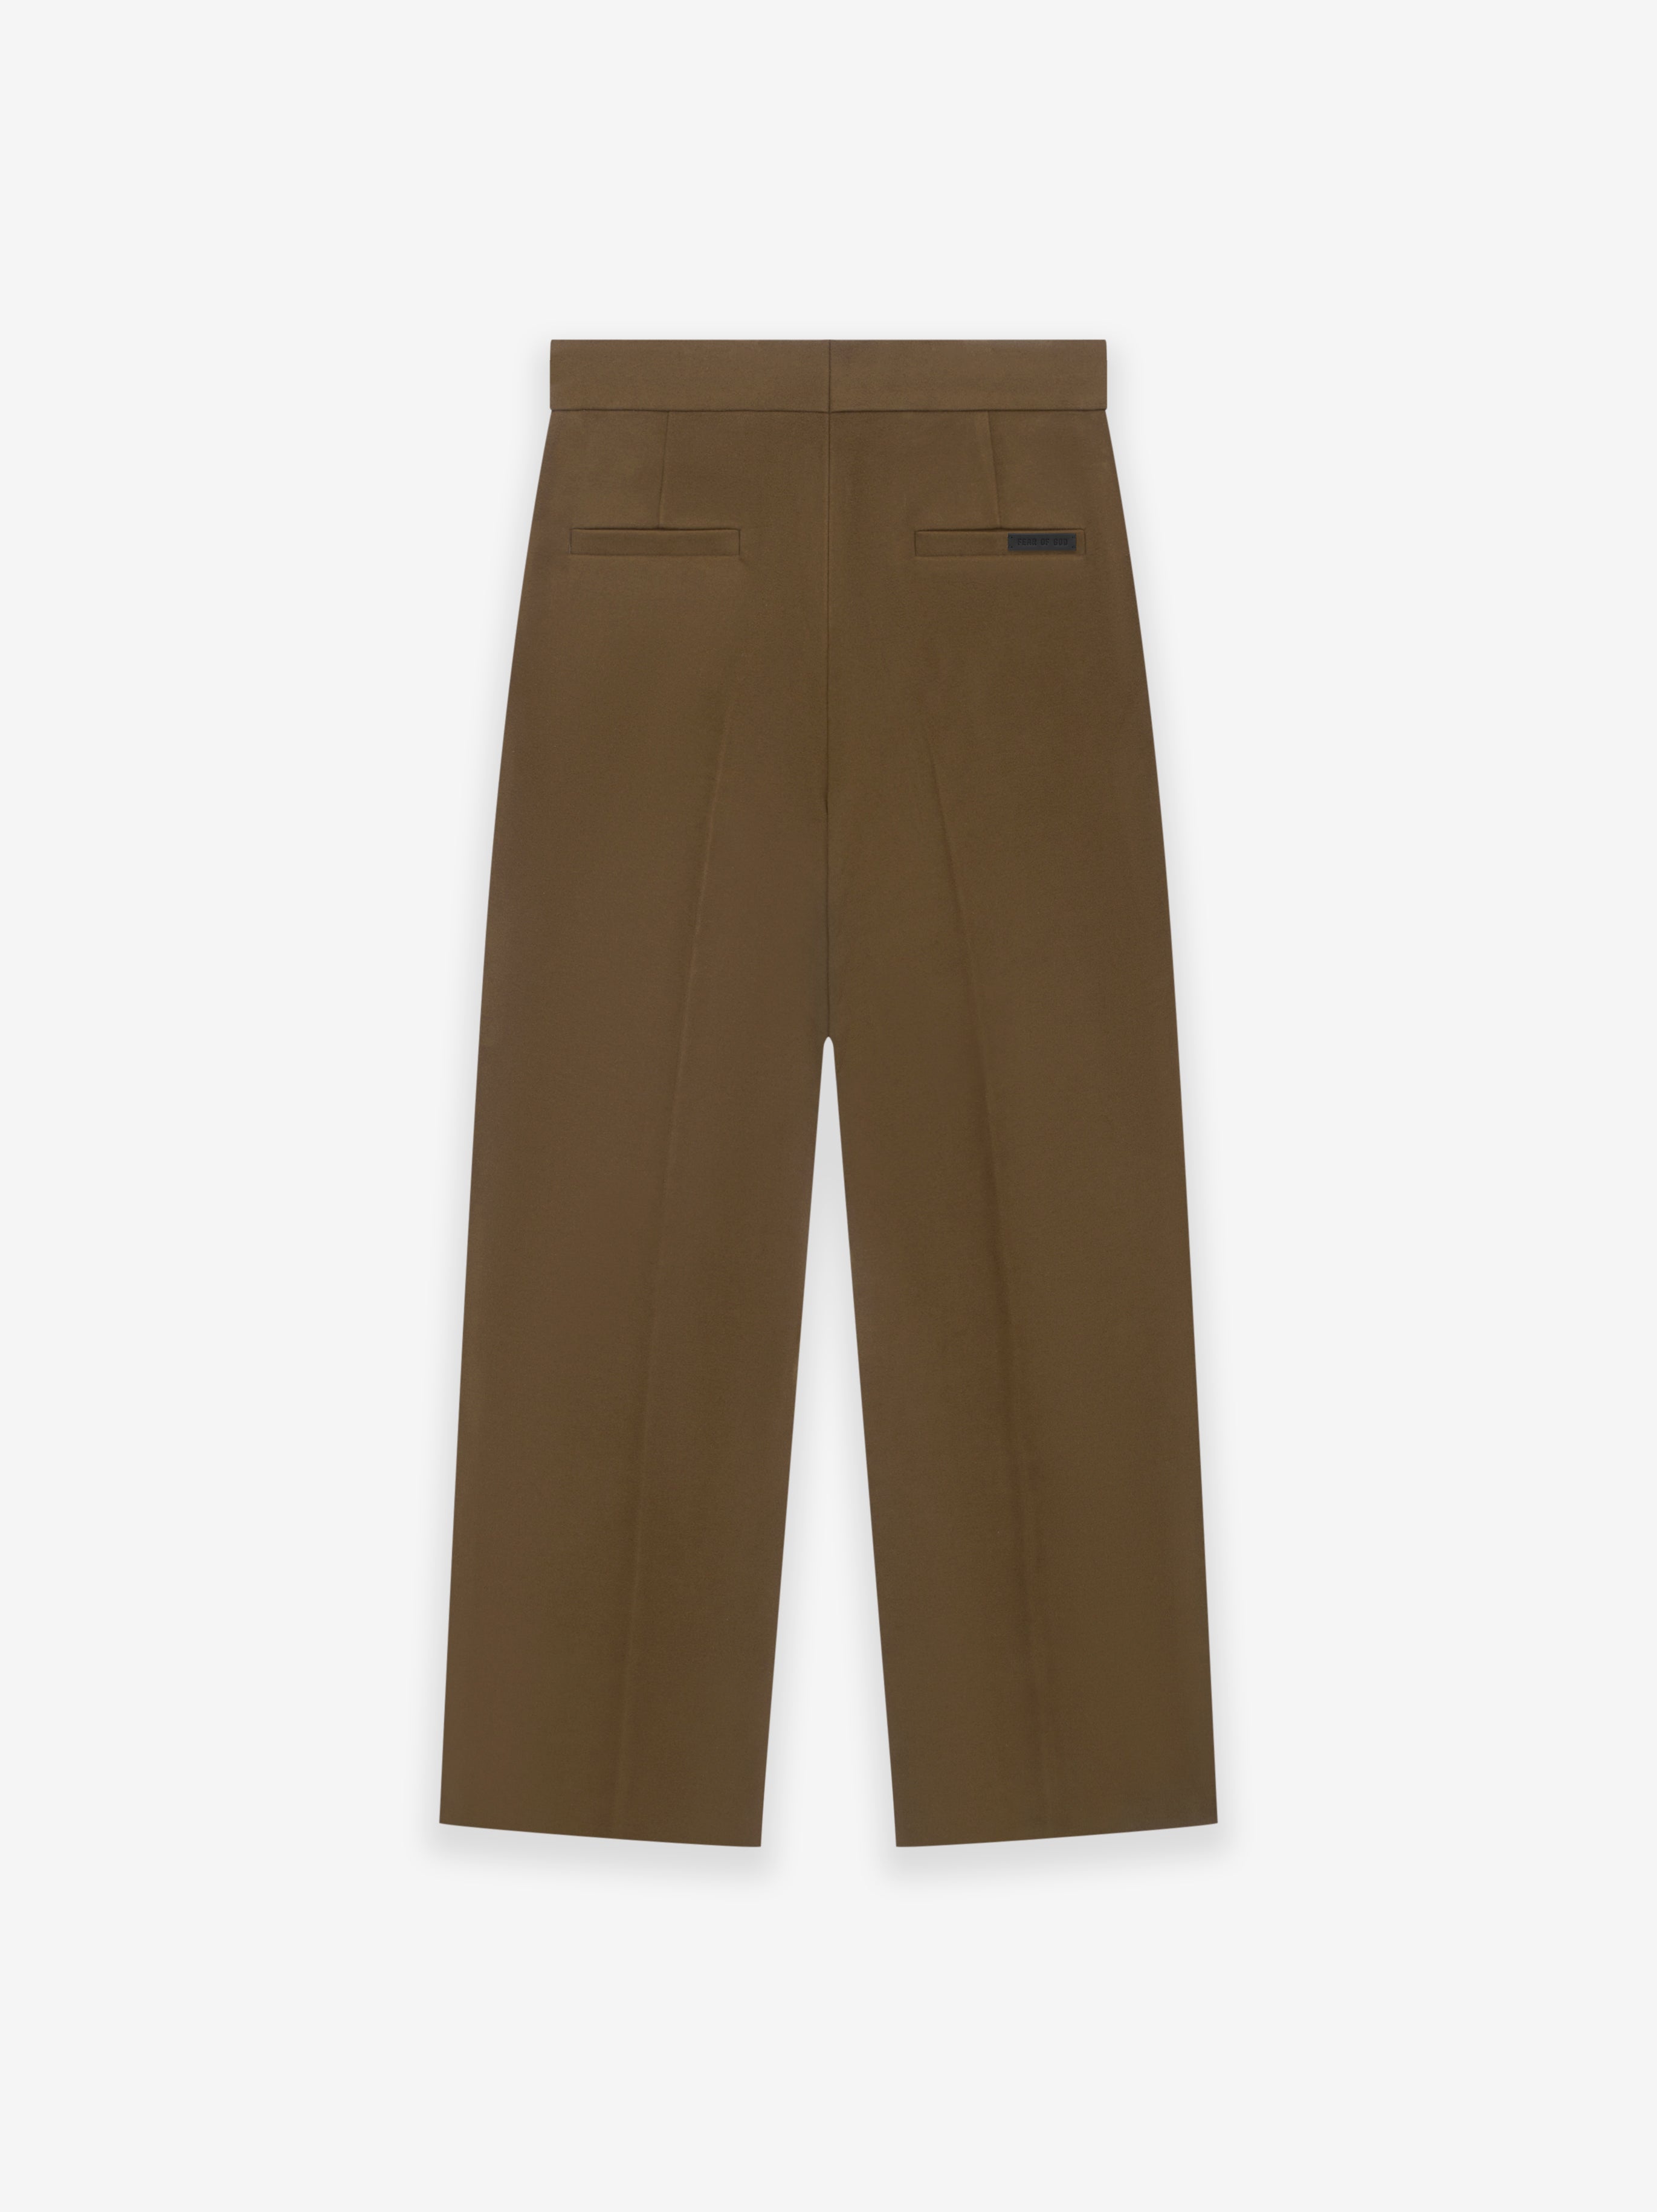 Fear of God ESSENTIALS Taupe Relaxed Trousers 'Desert Taupe' - 785BT214652K  | Solesense